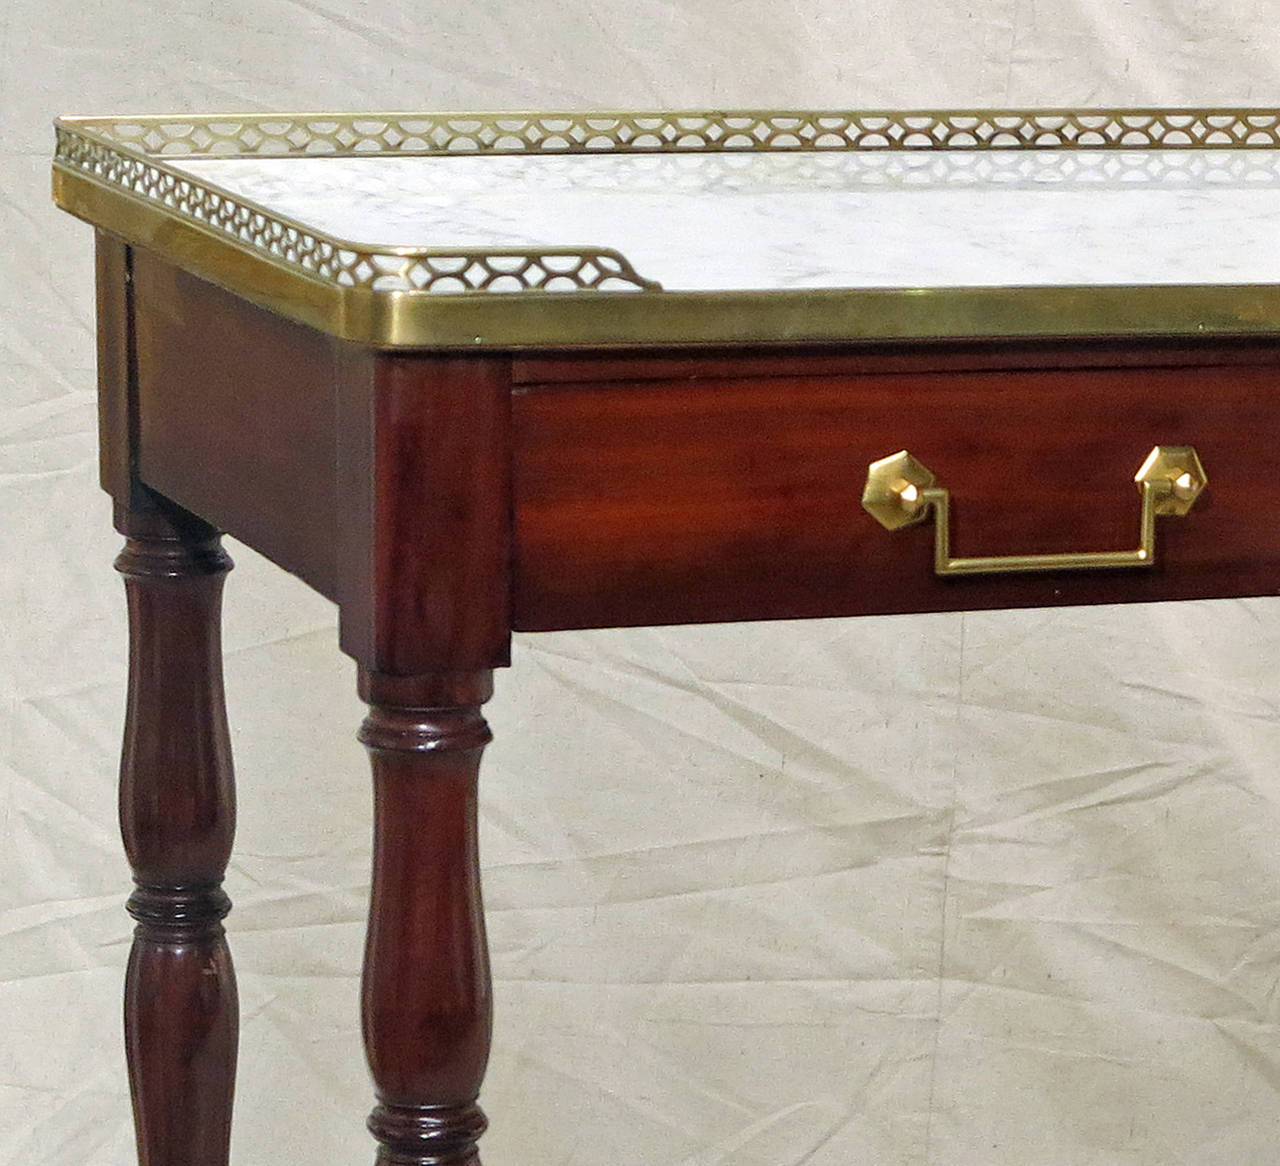 A Fine & Rare Directoire Mahogany 
Console/Desserte Table by Jacob Rue Meslee
Circa 1796-1803
George Jacob Maitre 1765
Son Georges Jacob and François-Honoré create the company Jacob Brothers Meslée Street, which will be active in the